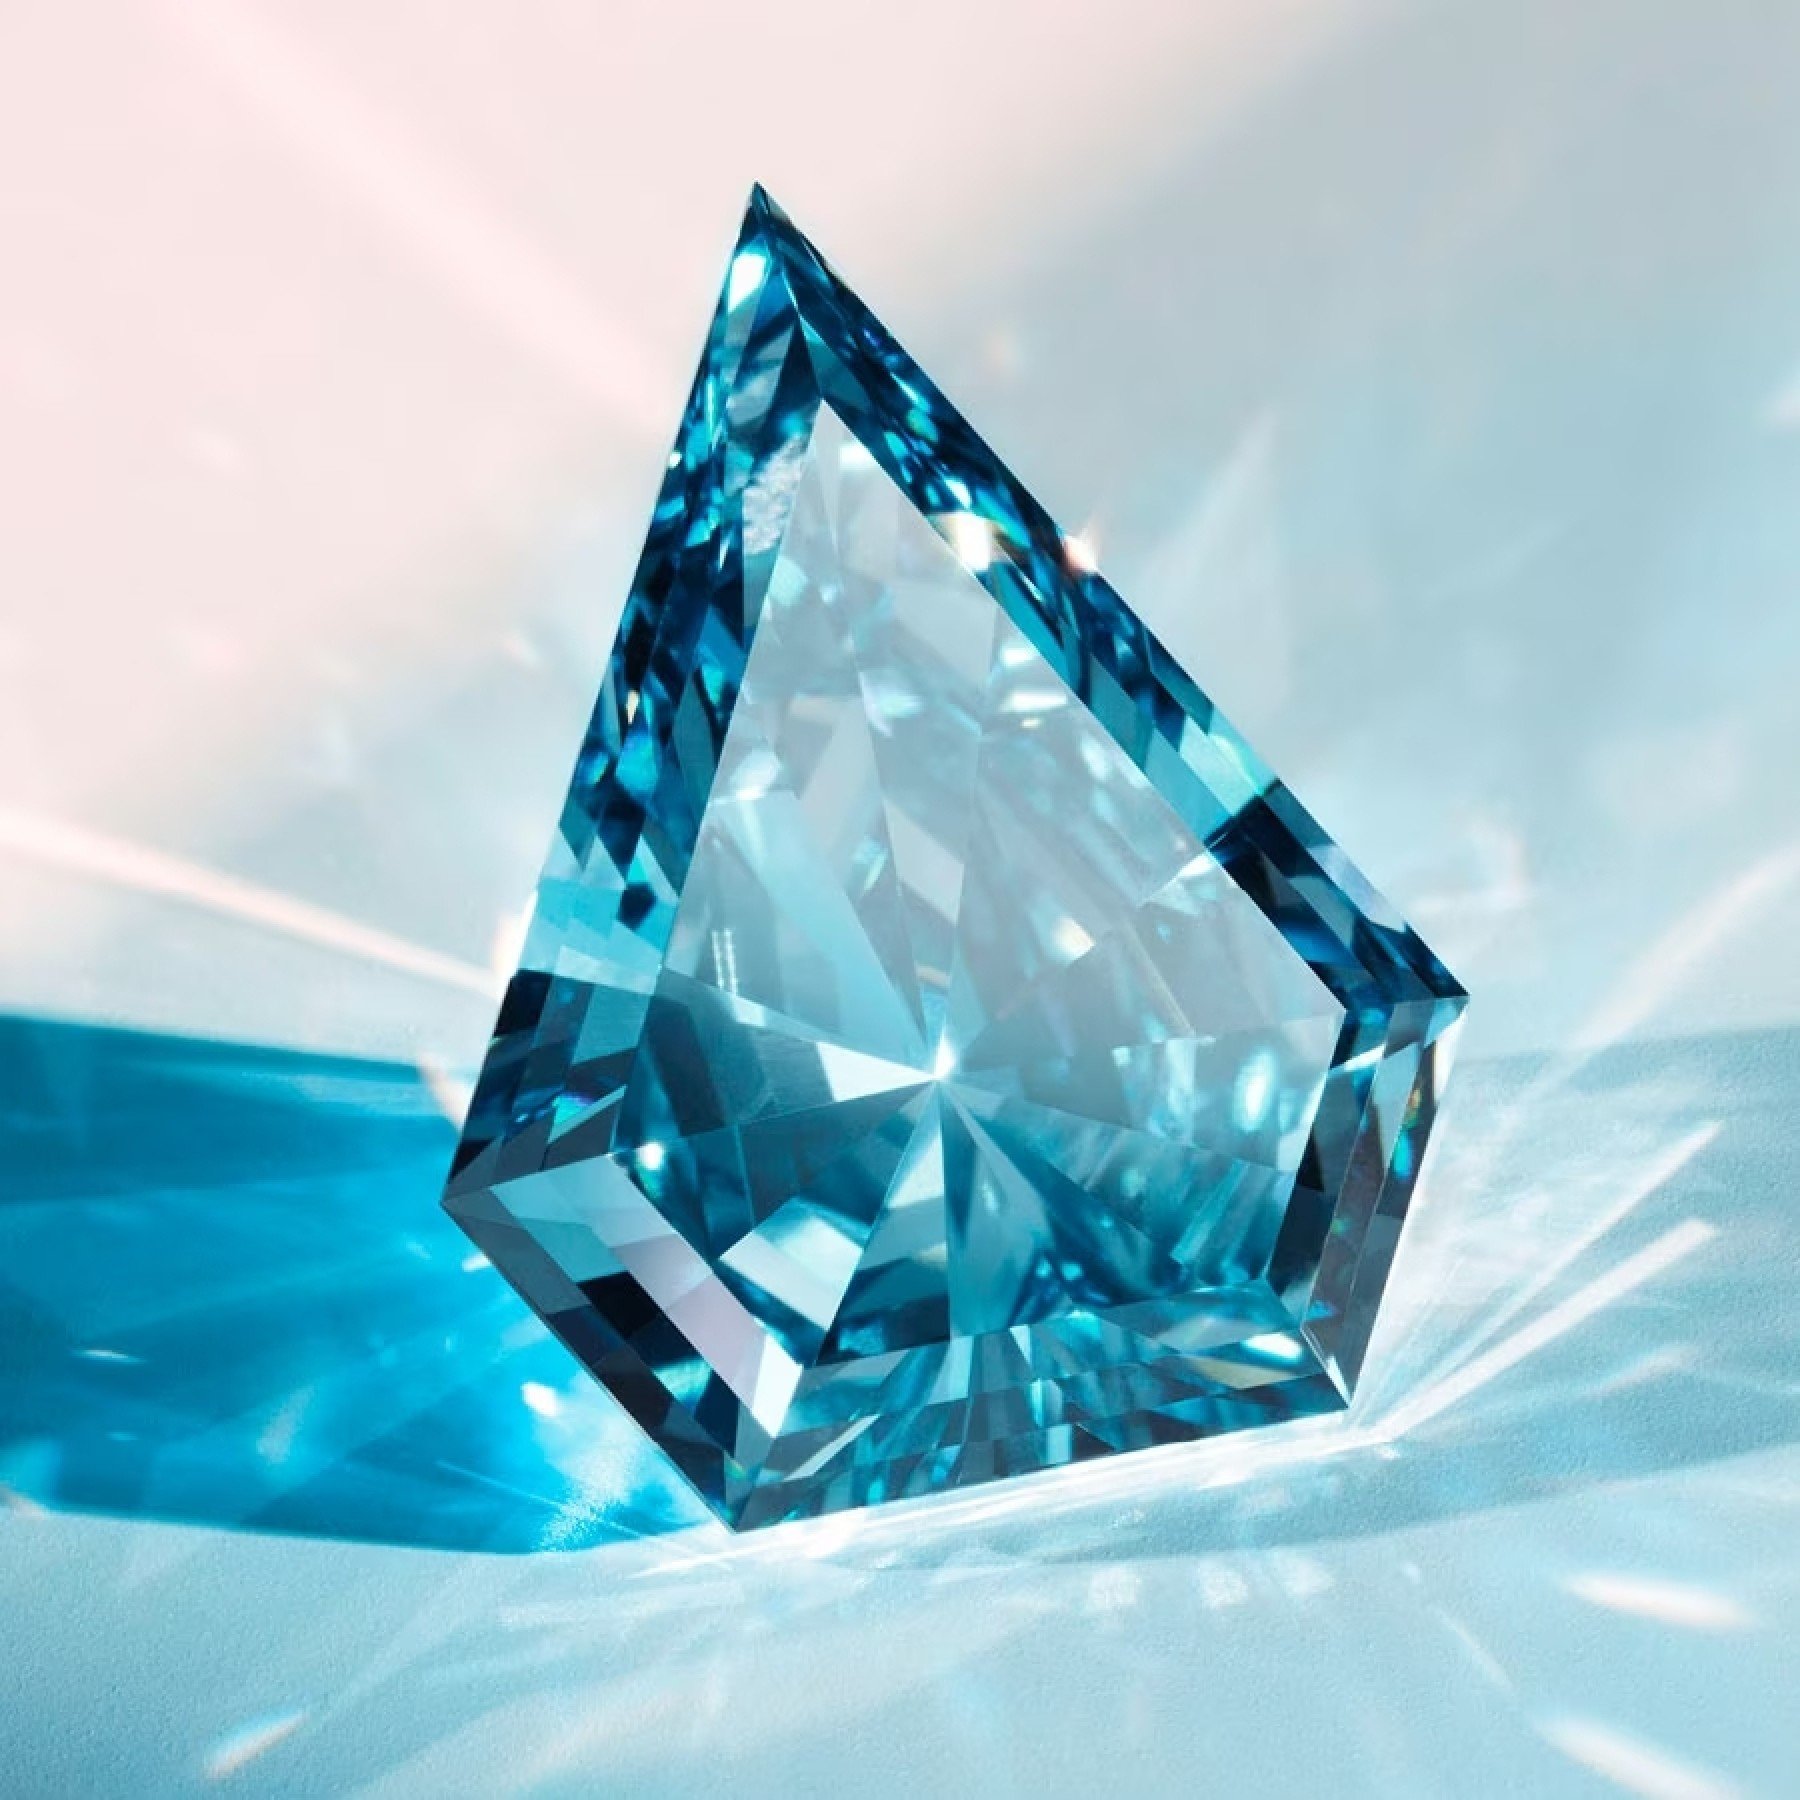 LVMH Tests The Waters With Lab-Grown Diamonds - Retail Bum